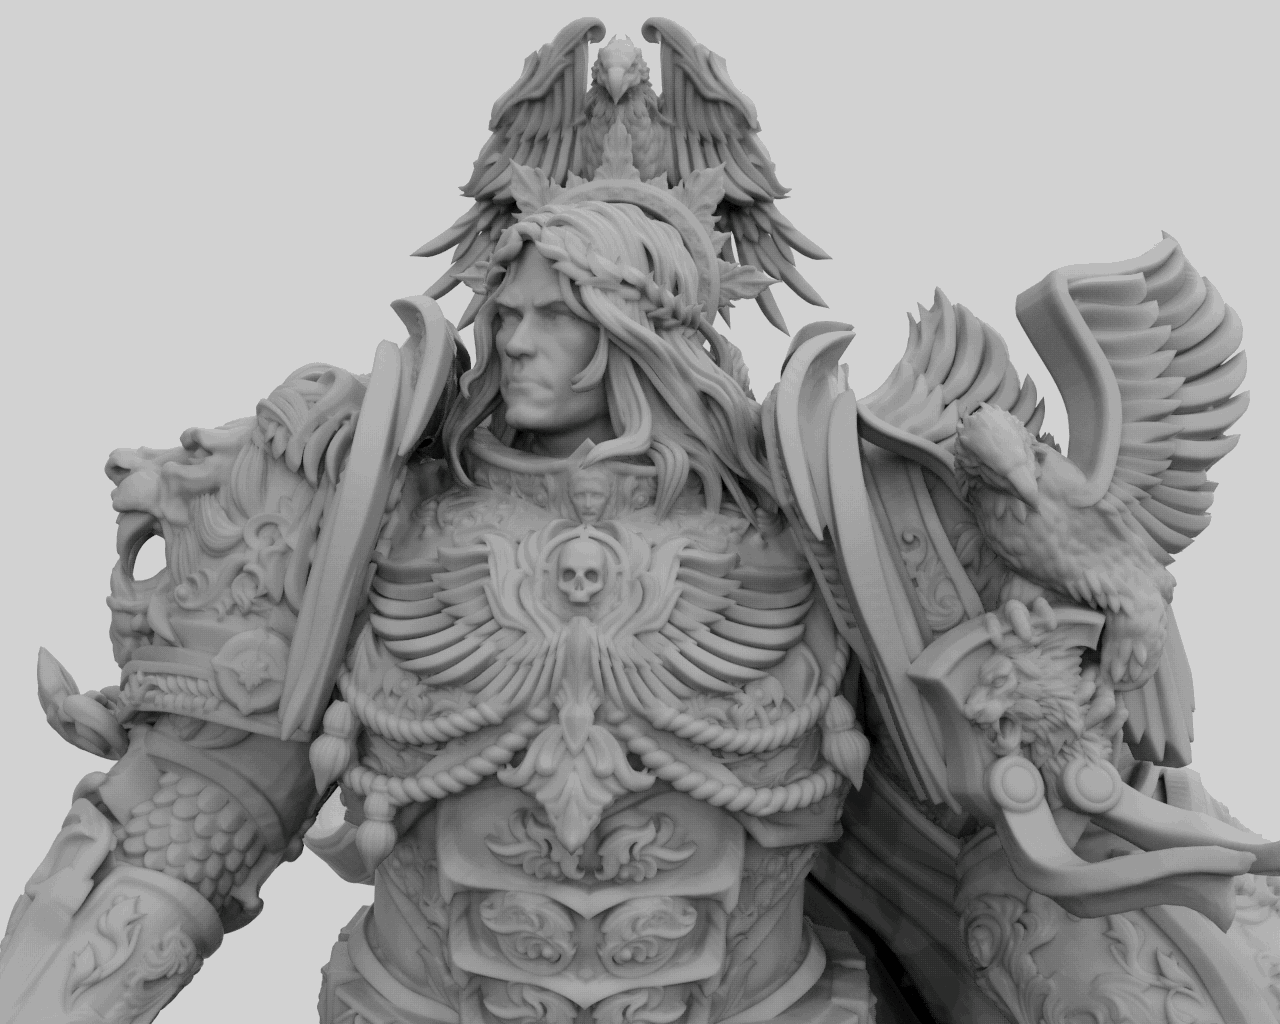 Emperor of Mankind Alternative Resin Model for Warhammer 40,000  Alternate resin model available to fans of Warhammer 40,000. This stunning model is made from high quality resin and is beautifully detailed.  This model is perfect for Warhammer 40,000 players and collectors. It is a great addition to any army and will impress your opponents.  Characteristics:  - Made of high quality resin  - Very detailed  - Alternate model, unofficial from Games Workshop